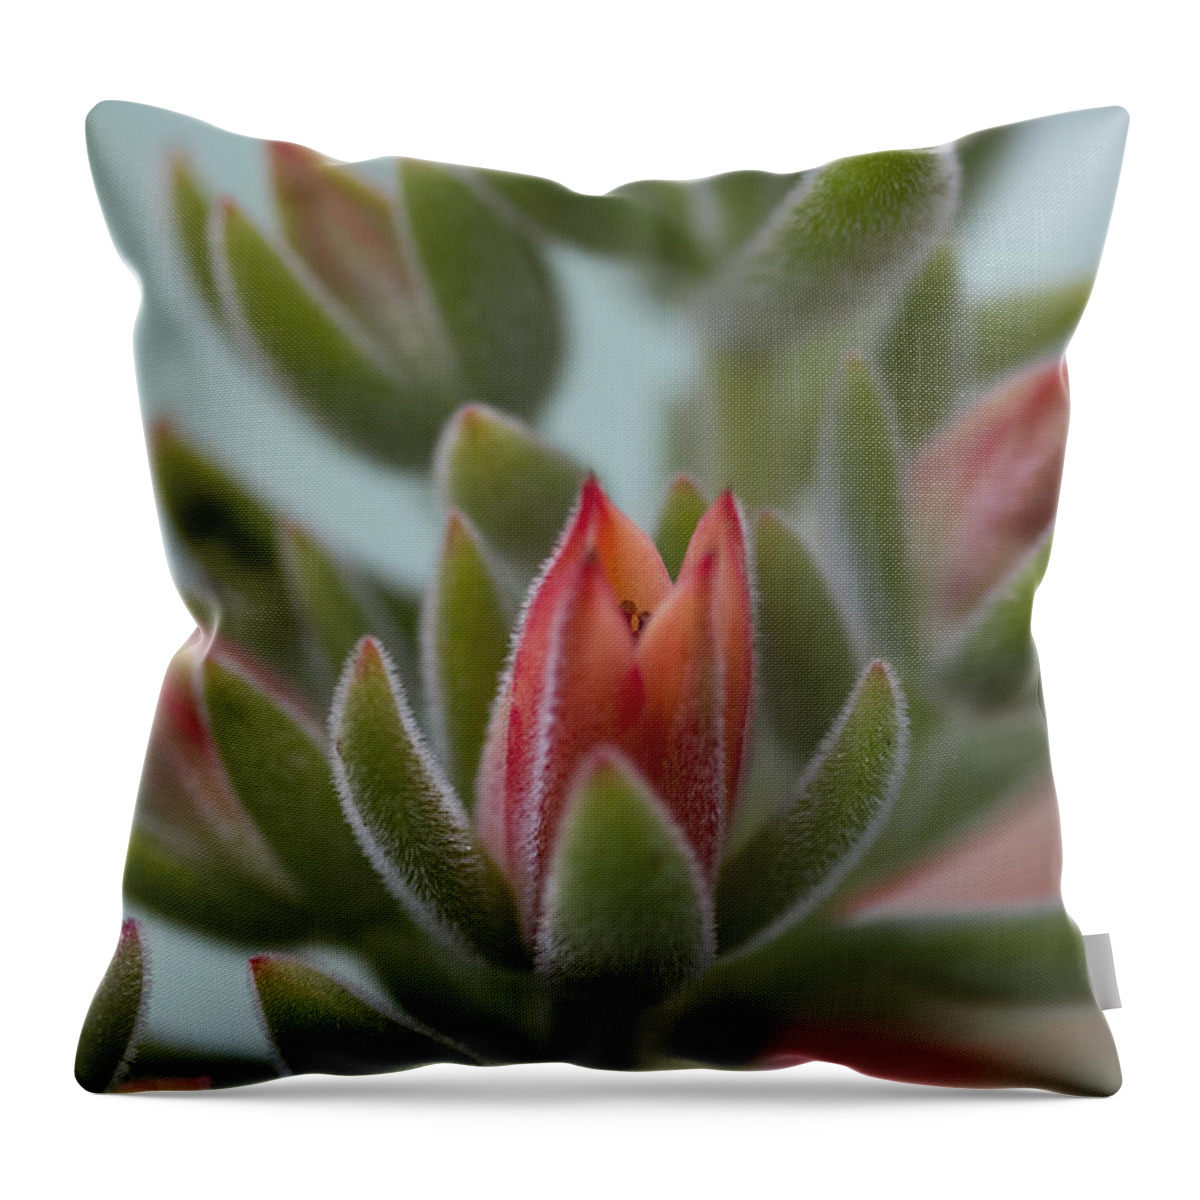 Succulent Throw Pillow featuring the photograph Orange Succulent Blossom Macro by Kathy Clark